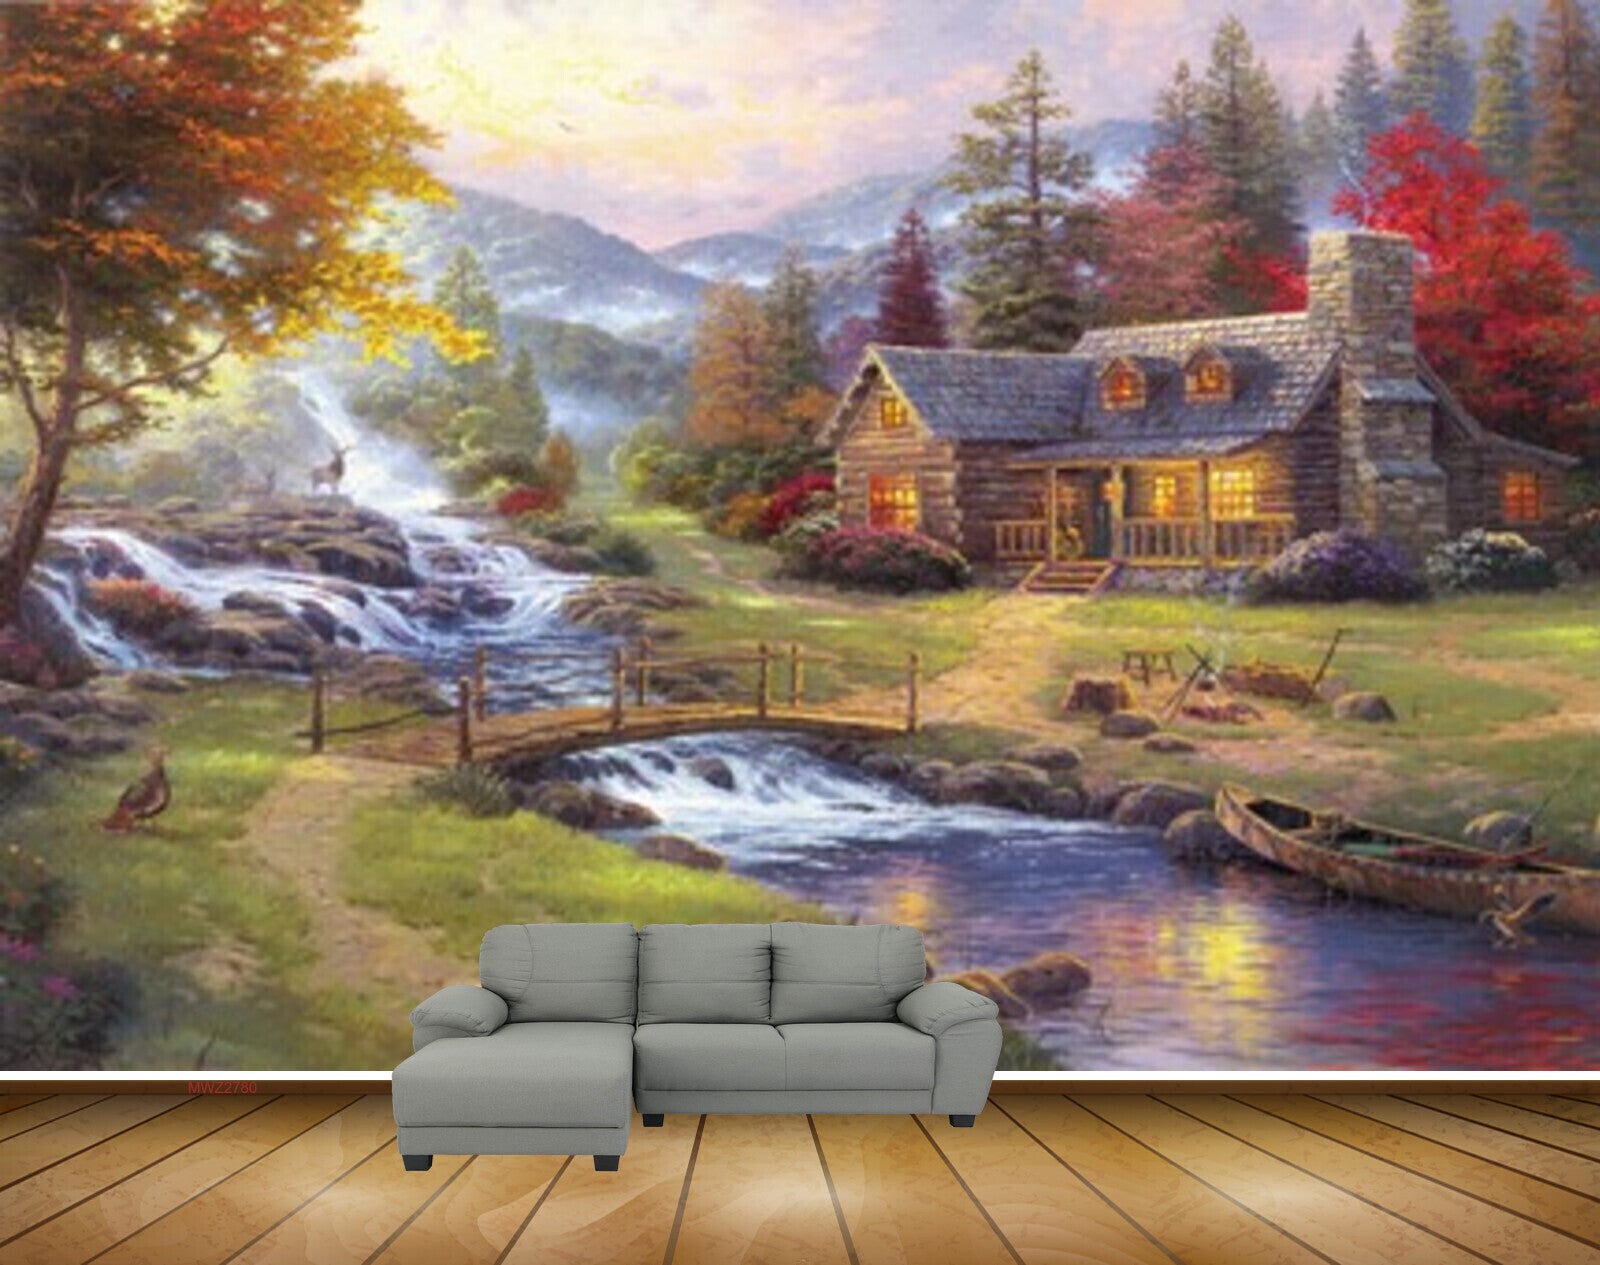 Avikalp MWZ2780 Waterfalls Mountains Houses River Pond Water Houses Trees Red Flowers Bridge Grass Boat Birds Painting HD Wallpaper